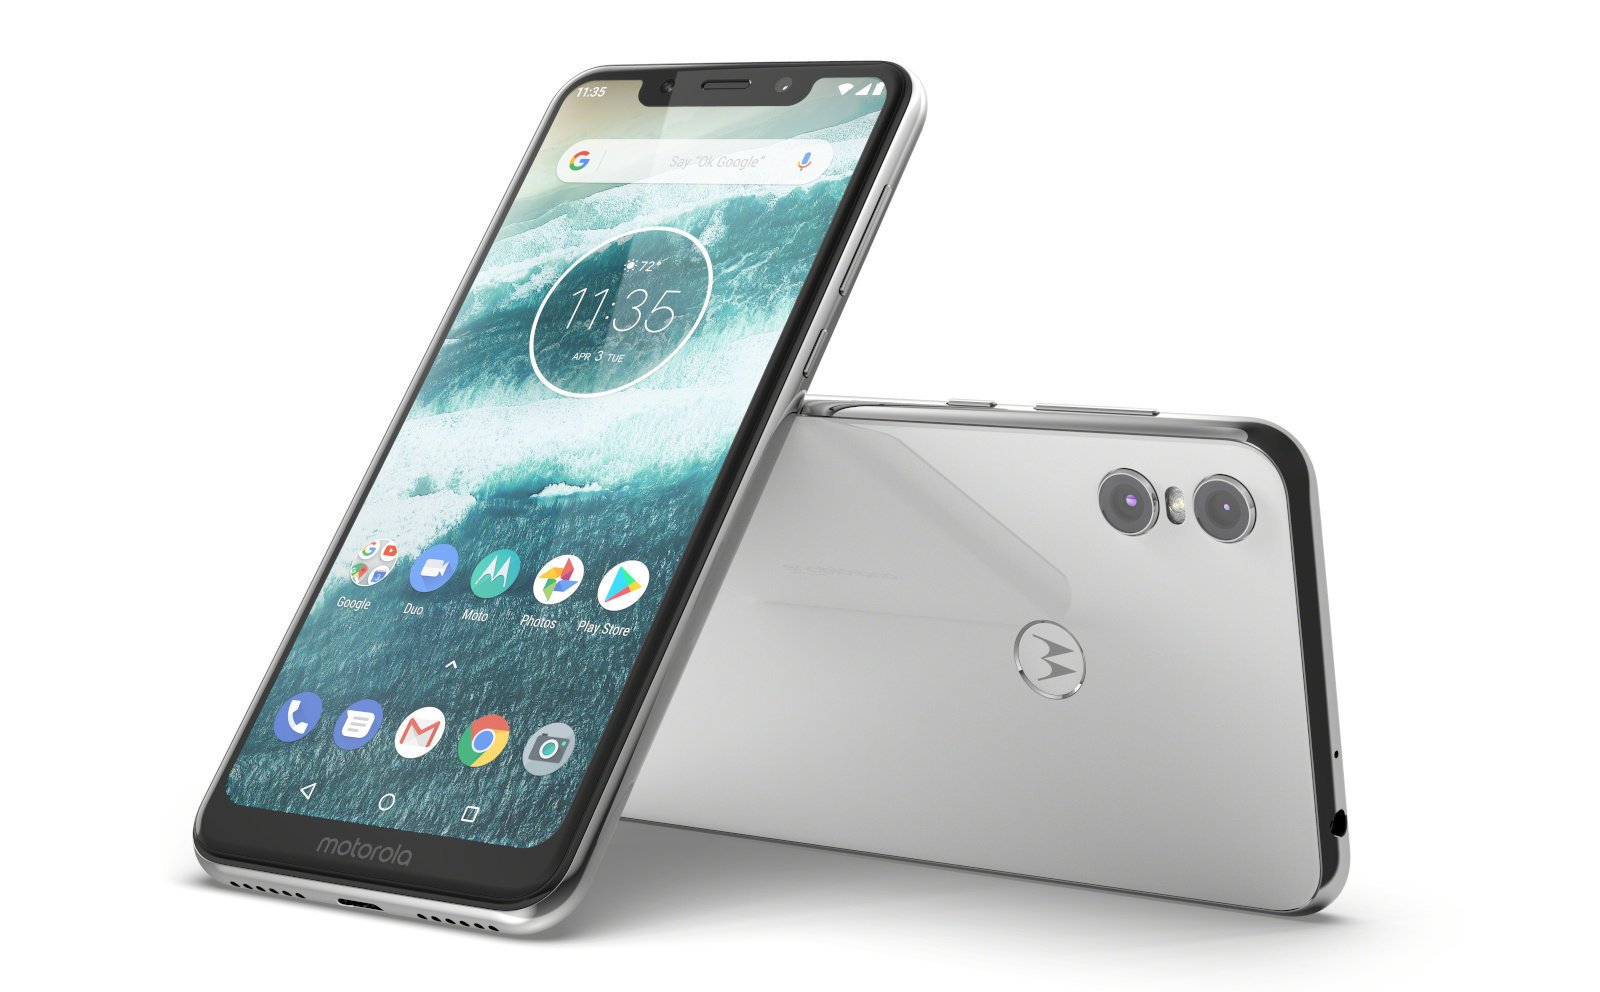 Motorola One Launched in India